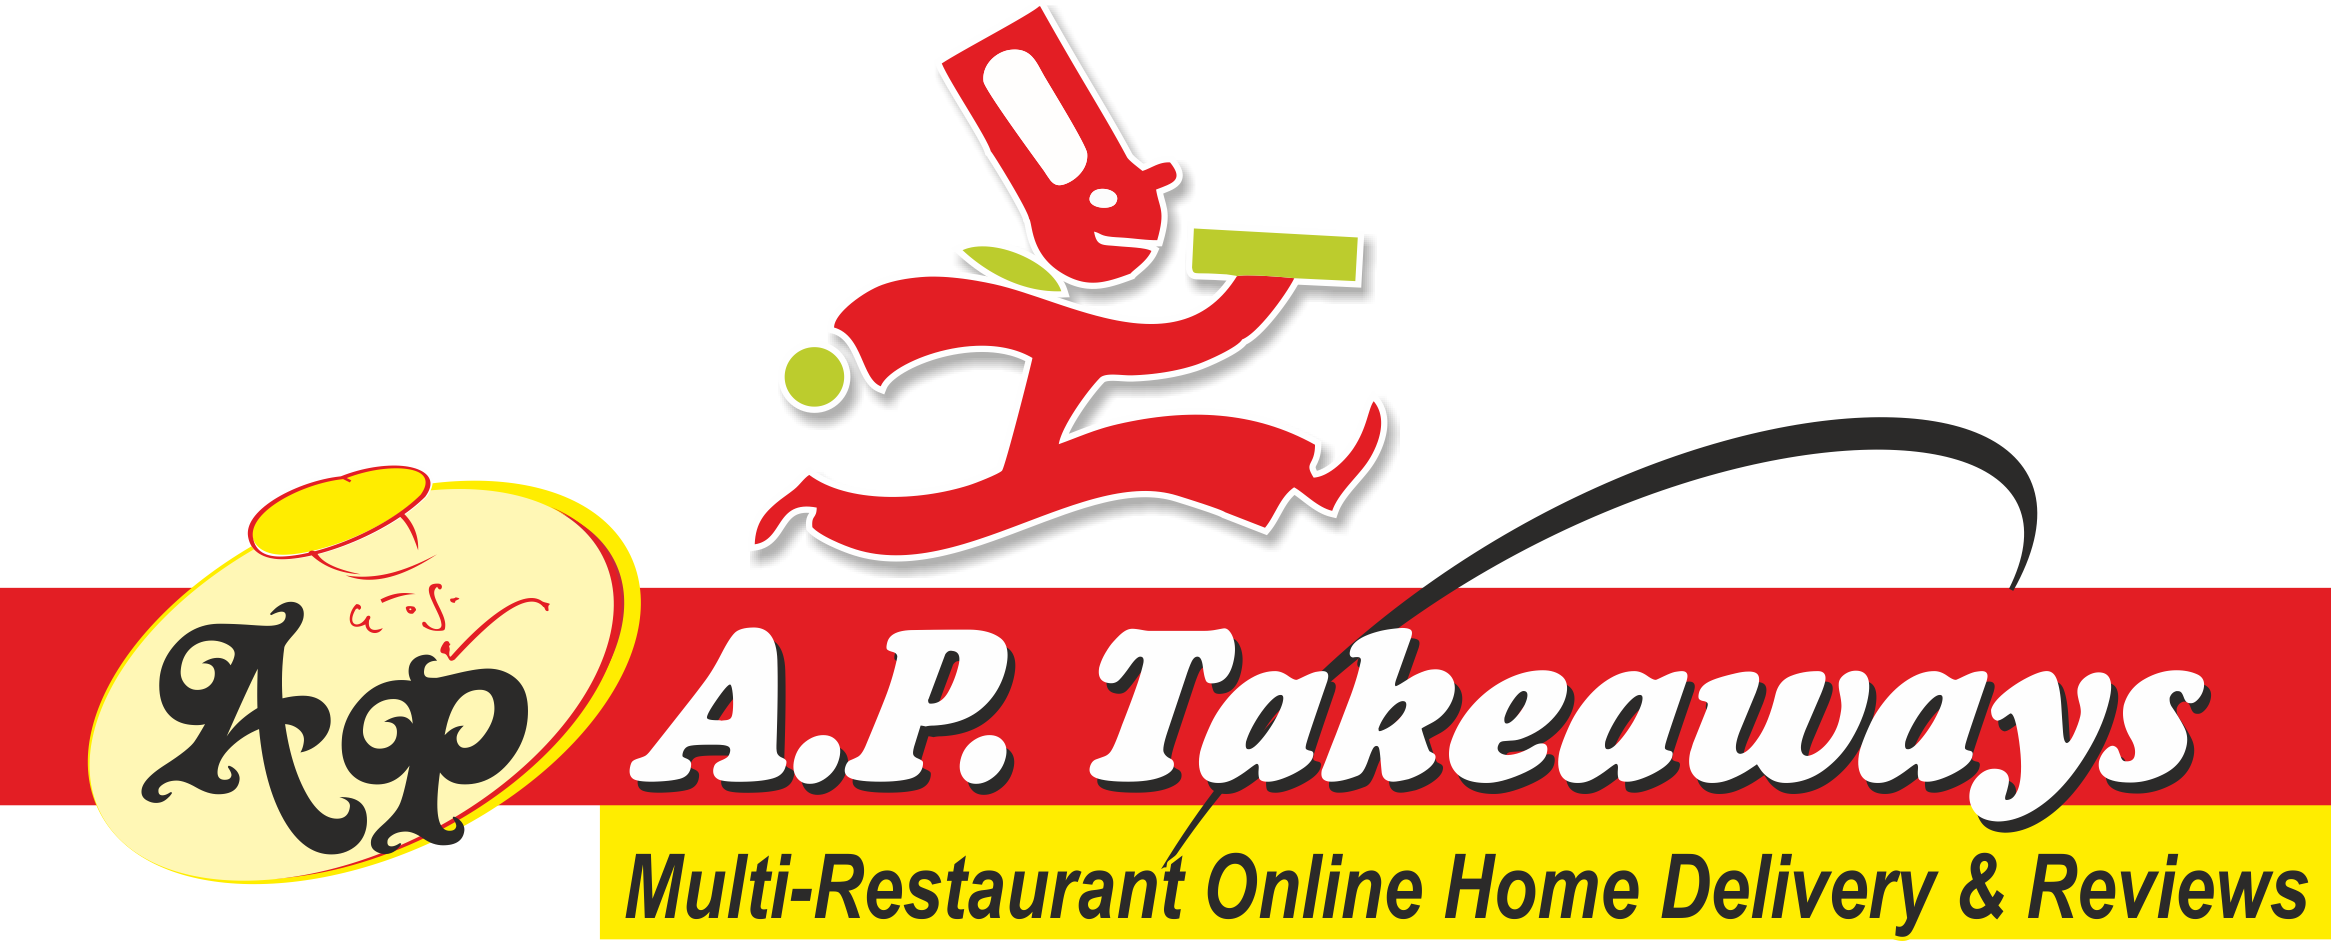 A Multi-Restaurant Online Home Delivery Service with Restaurant Reviews